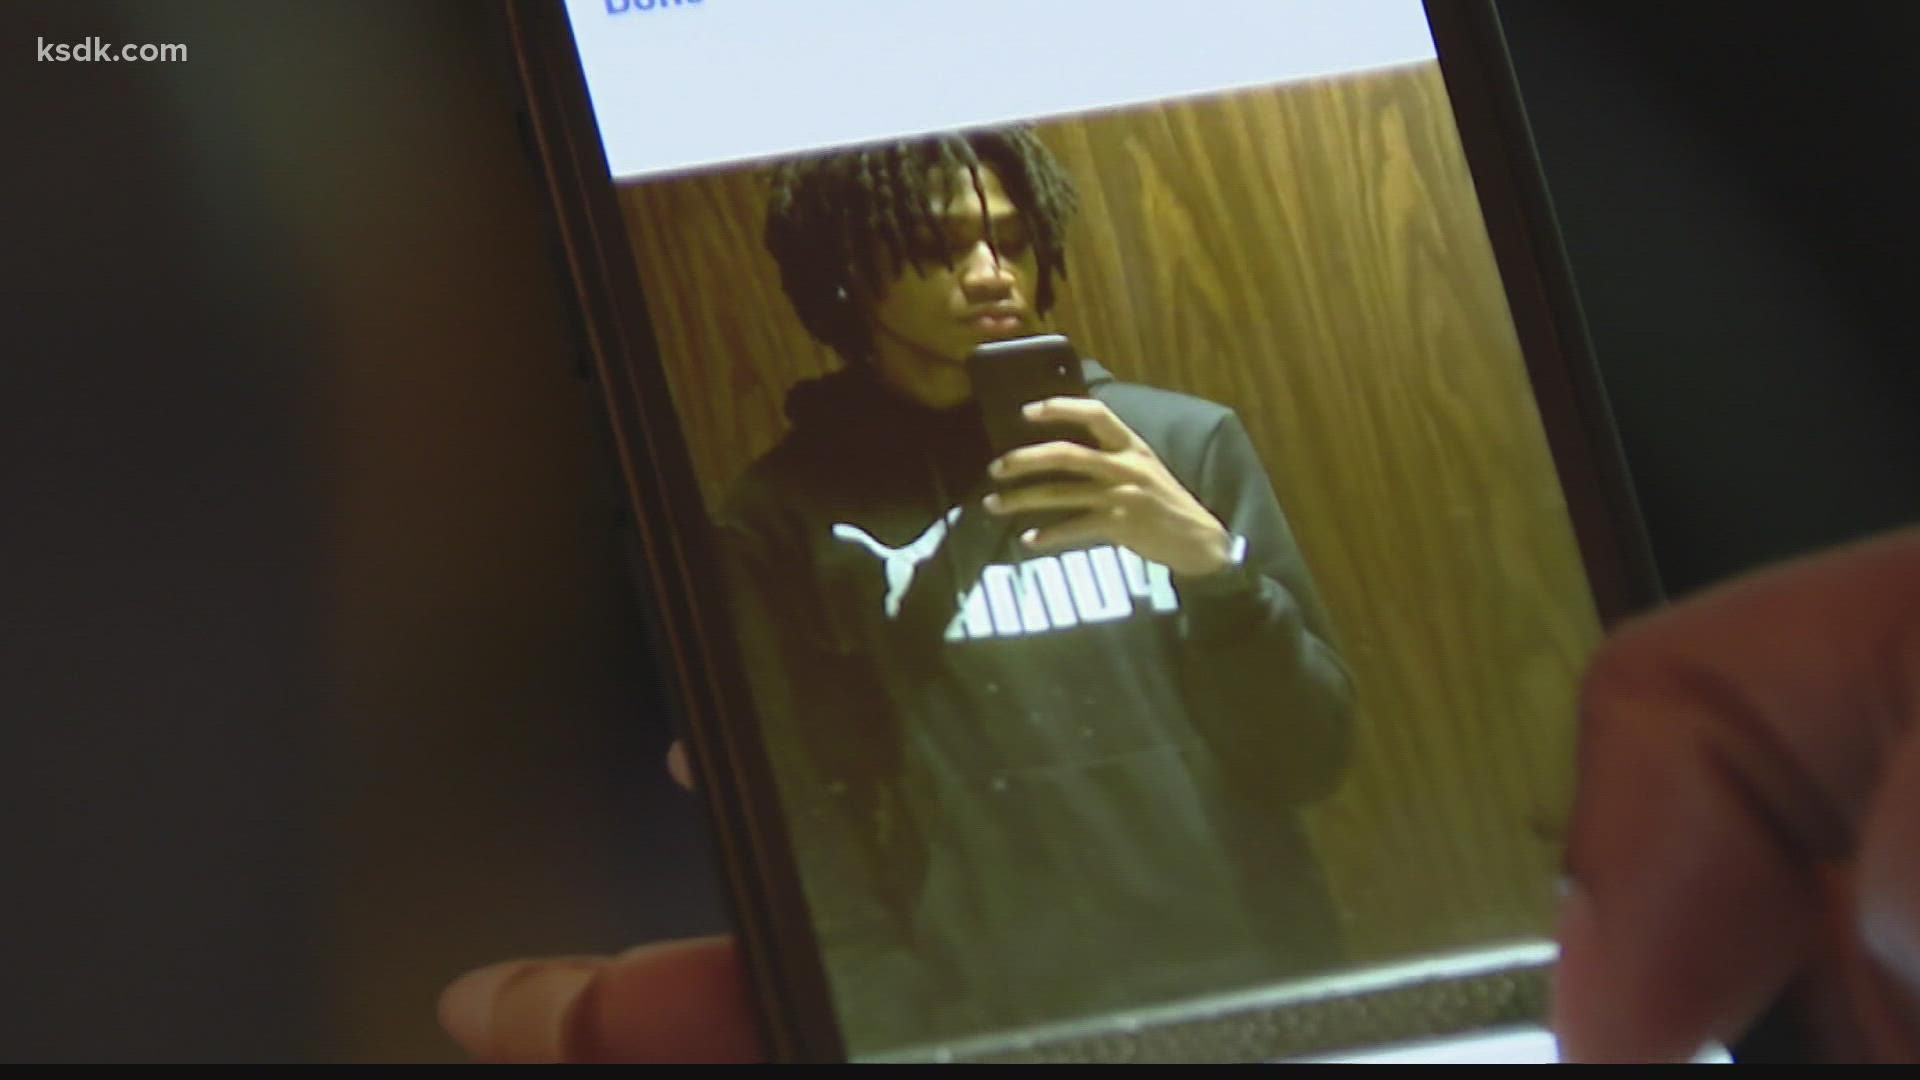 A mother on Monday started to prepare a burial for her teenage son, who she believes was mistakenly shot and killed in North St. Louis last week.